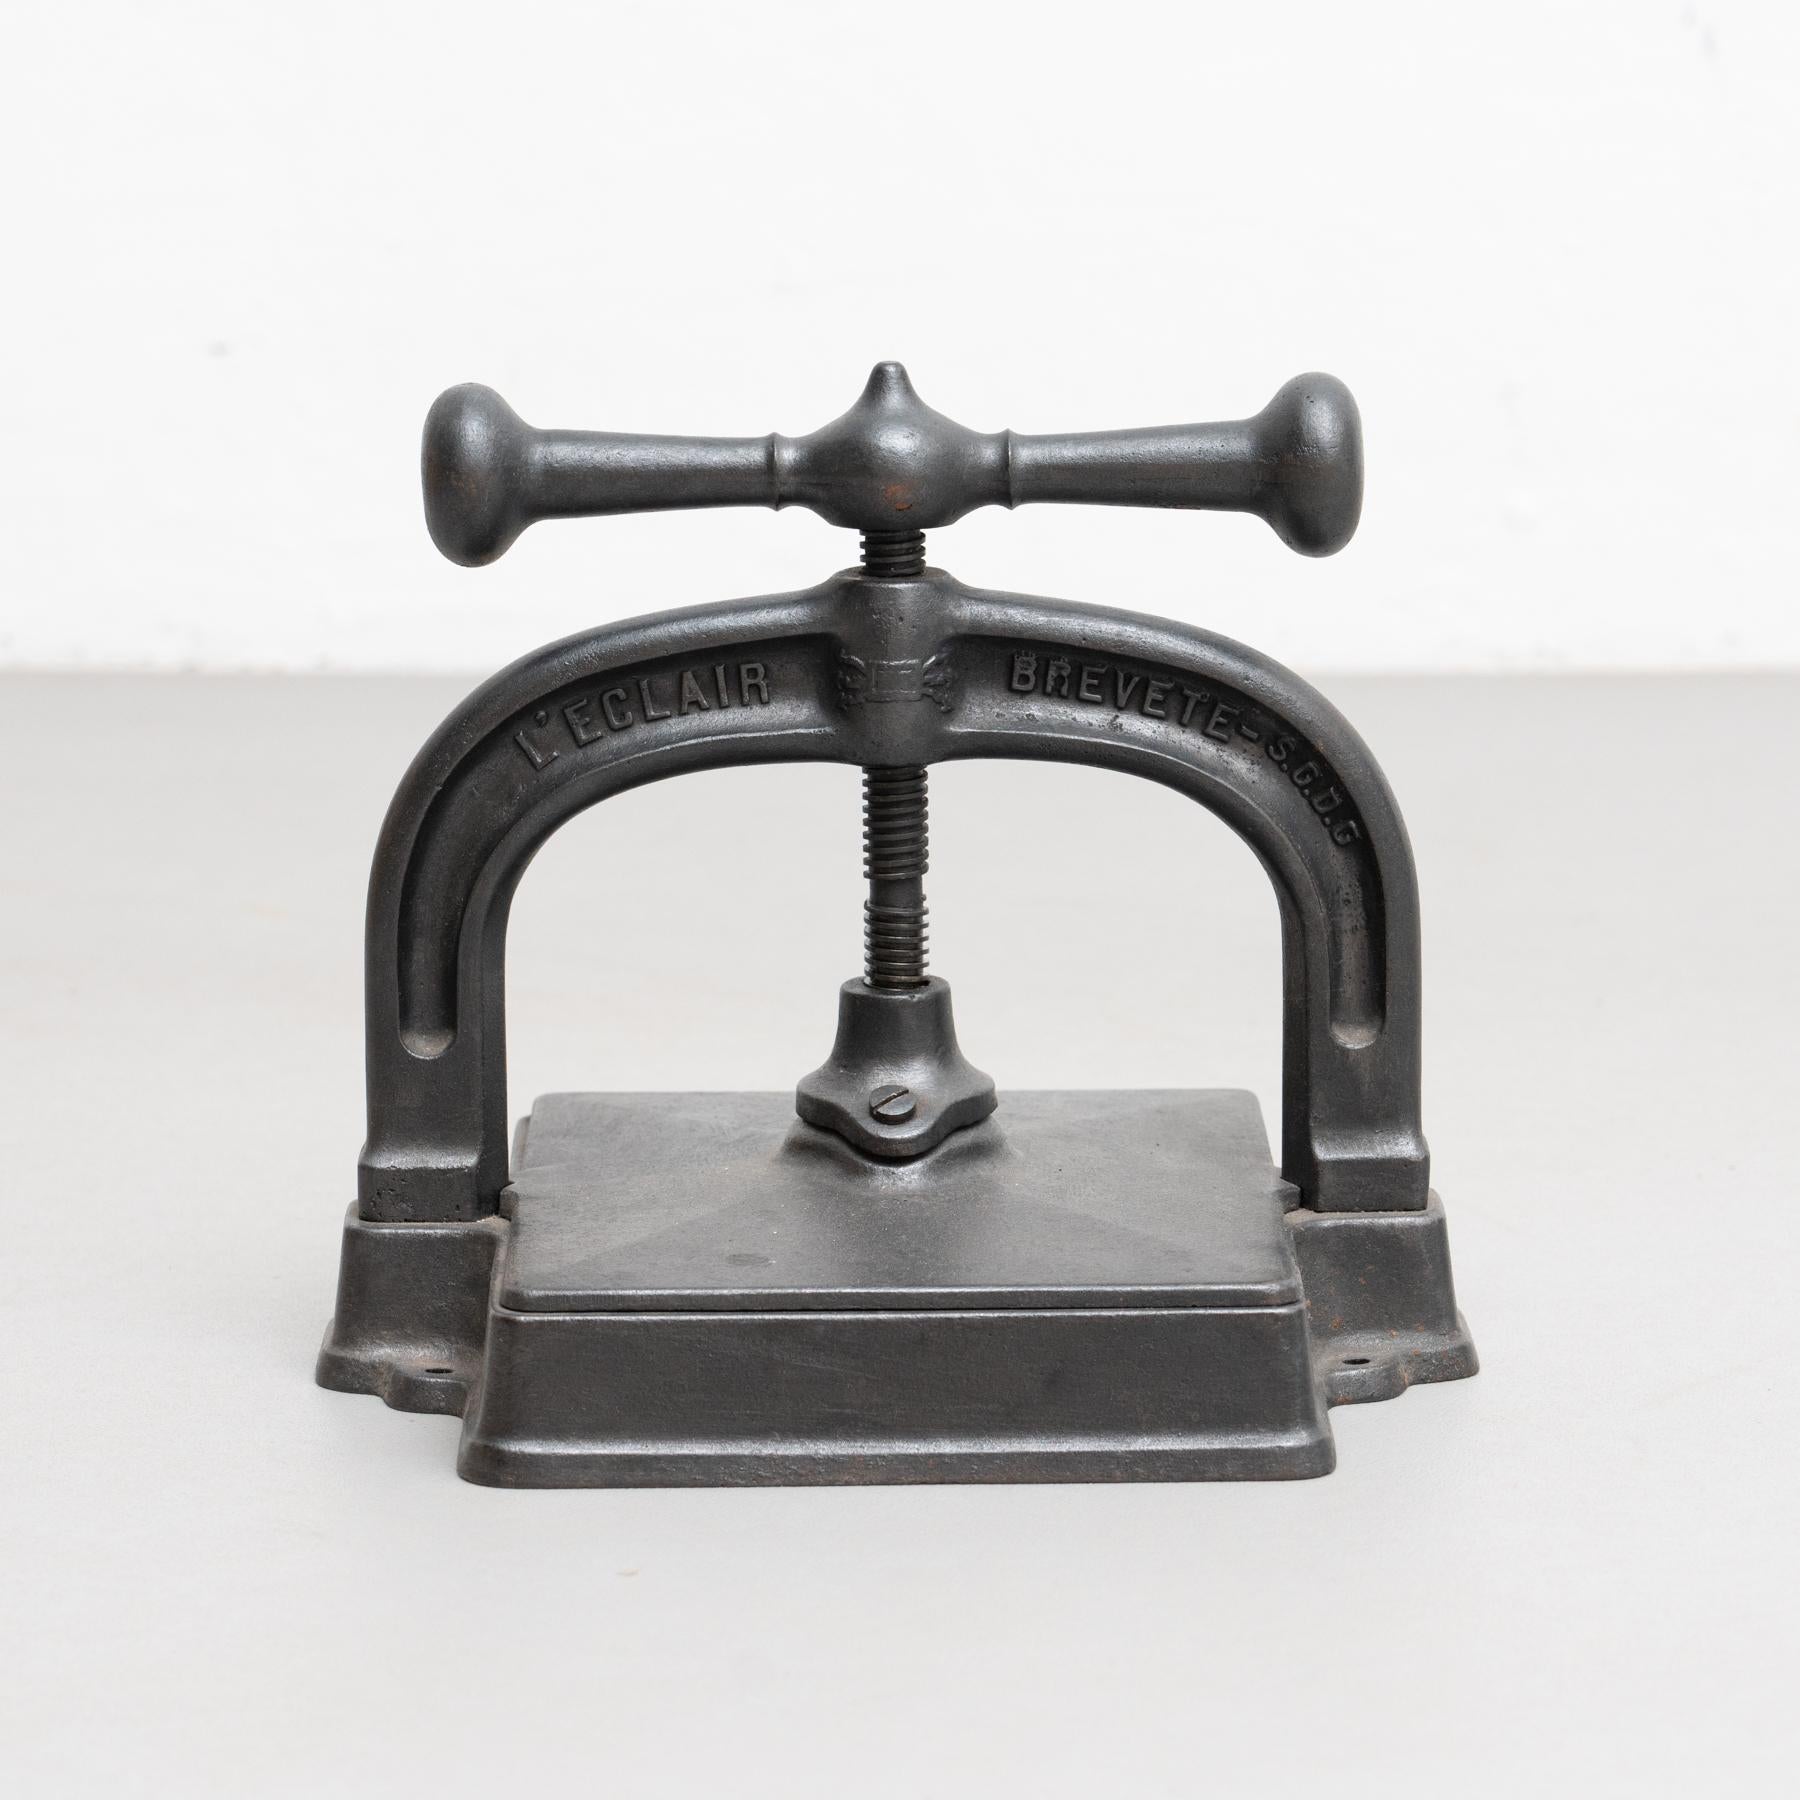 Vintage rustic rotating metal paper printing press tool.

By unknown manufacturer France circa 1900.

In original condition, with minor wear consistent with age and use, preserving a beautiful patina.

Materials:
Metal.
 